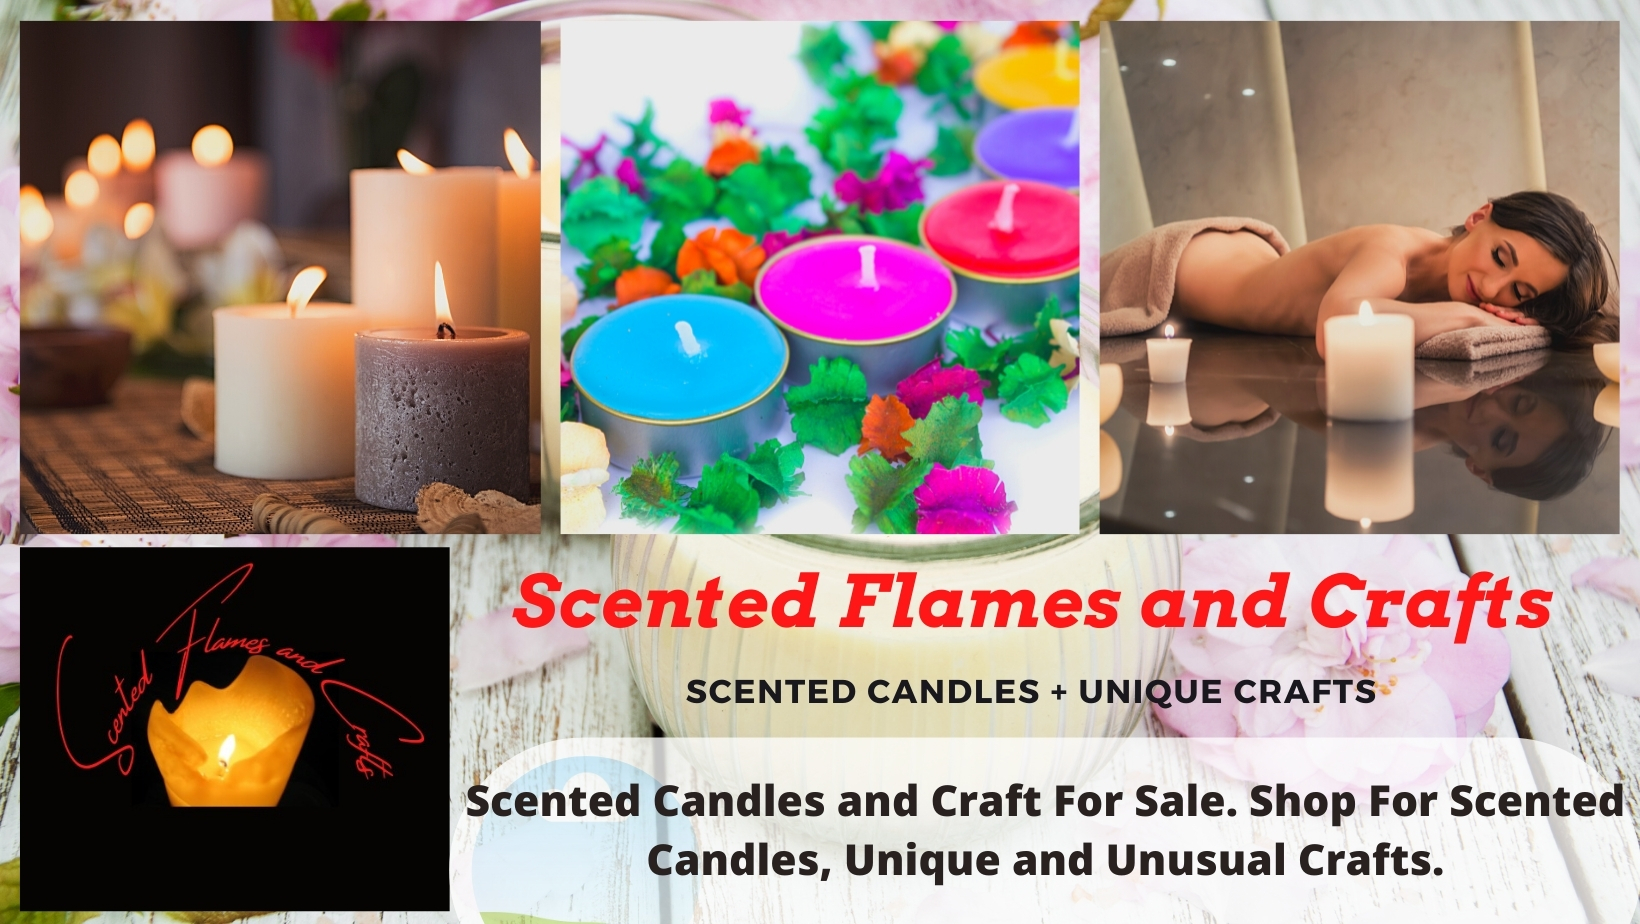 Shop Scented Candles, Bath Soaps, Bath and Body Care Supplies.